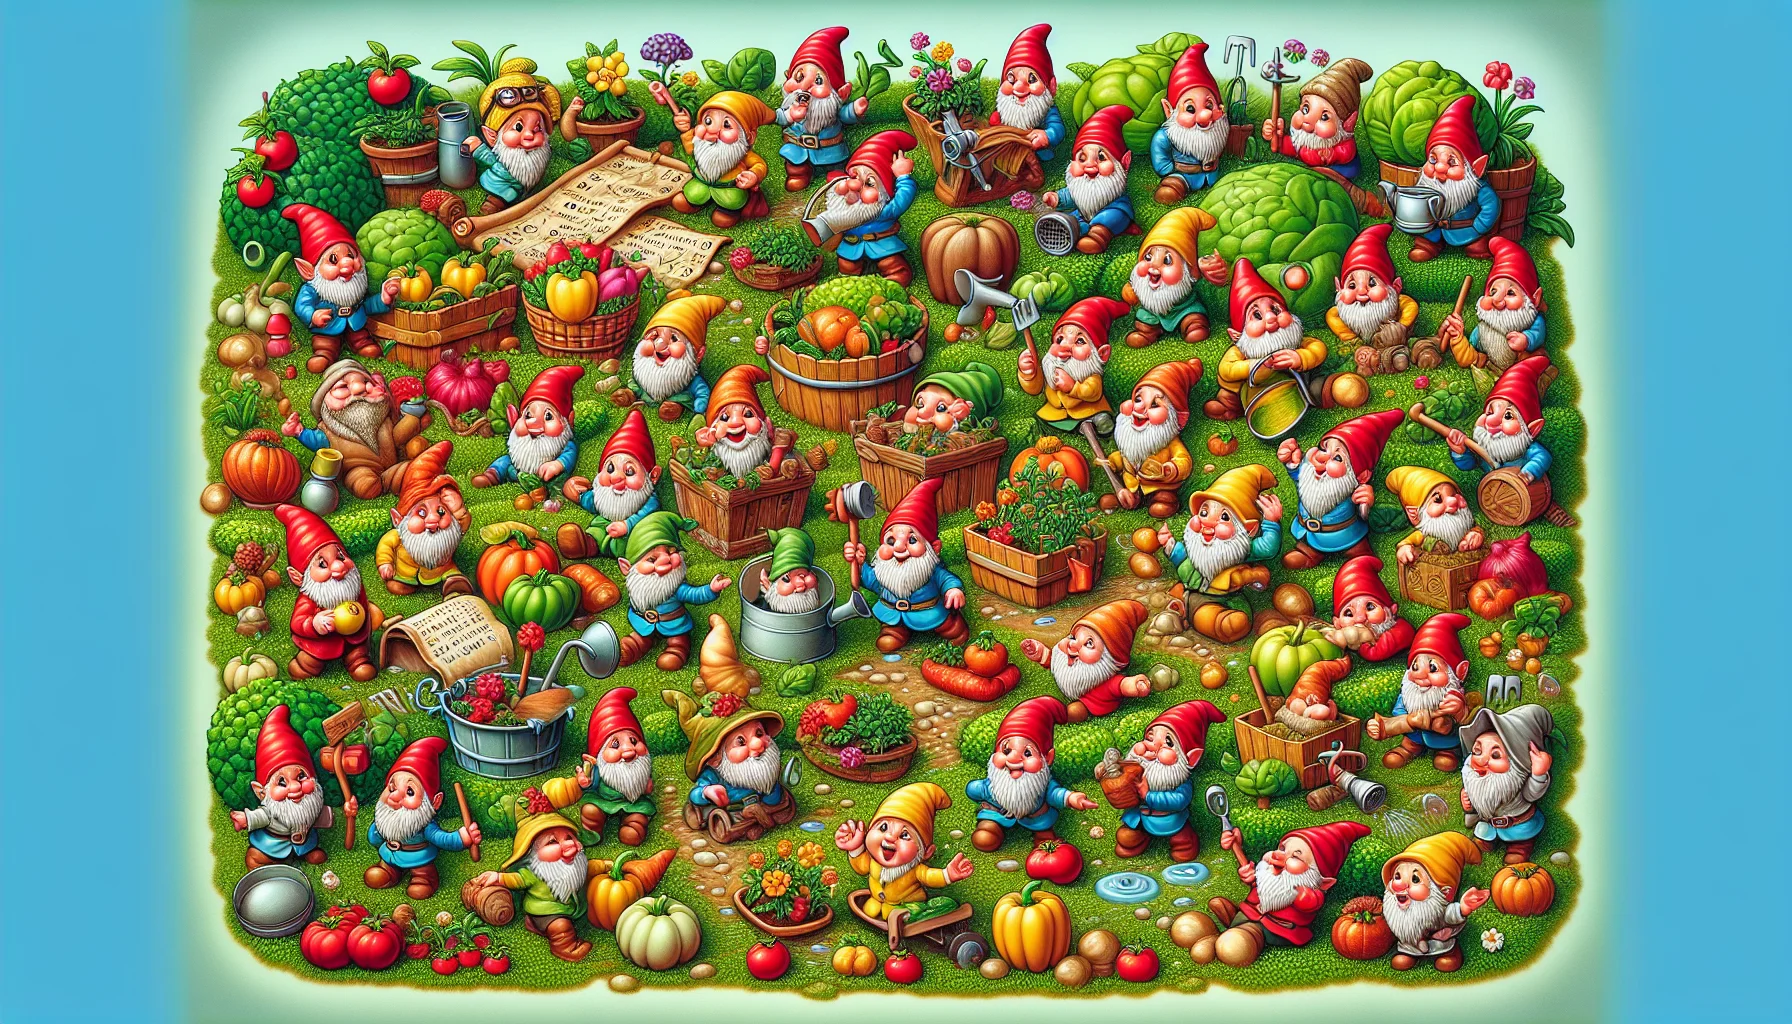 Generate an image showing a humorous and captivating garden scene filled with various small, colorful garden gnomes. These gnomes are showcasing their charm and wit, engaged in several amusing actions that resemble gardening tasks. They’re making the viewers feel encouraged and interested in gardening. Some gnomes could be seen struggling with oversized vegetables, others following a treasure map that leads to a flower pot, or tripping over a watering can, all wrapped in a fun loving and bubbly atmosphere.